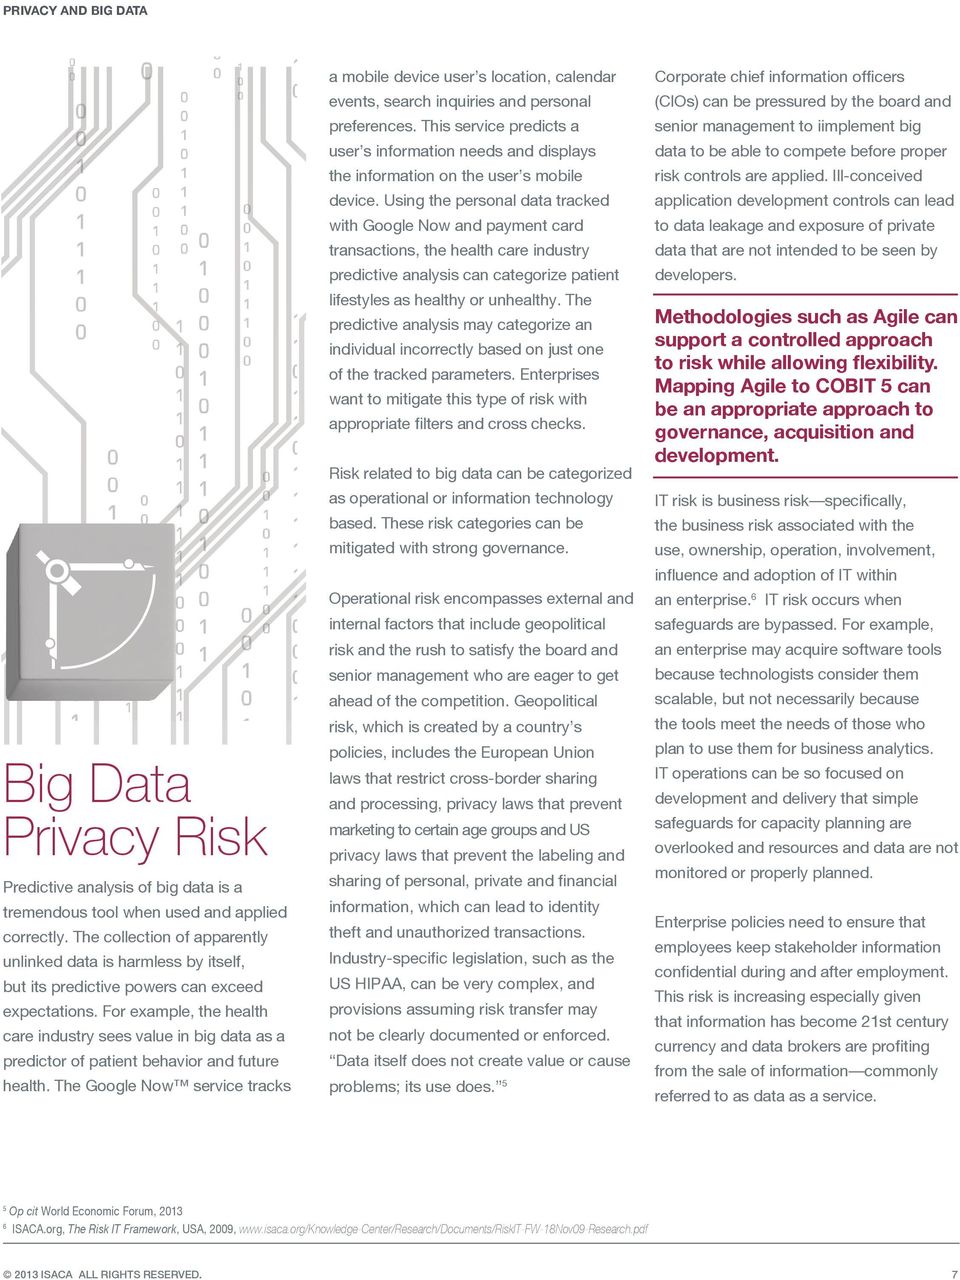 For example, the health care industry sees value in big data as a predictor of patient behavior and future health.